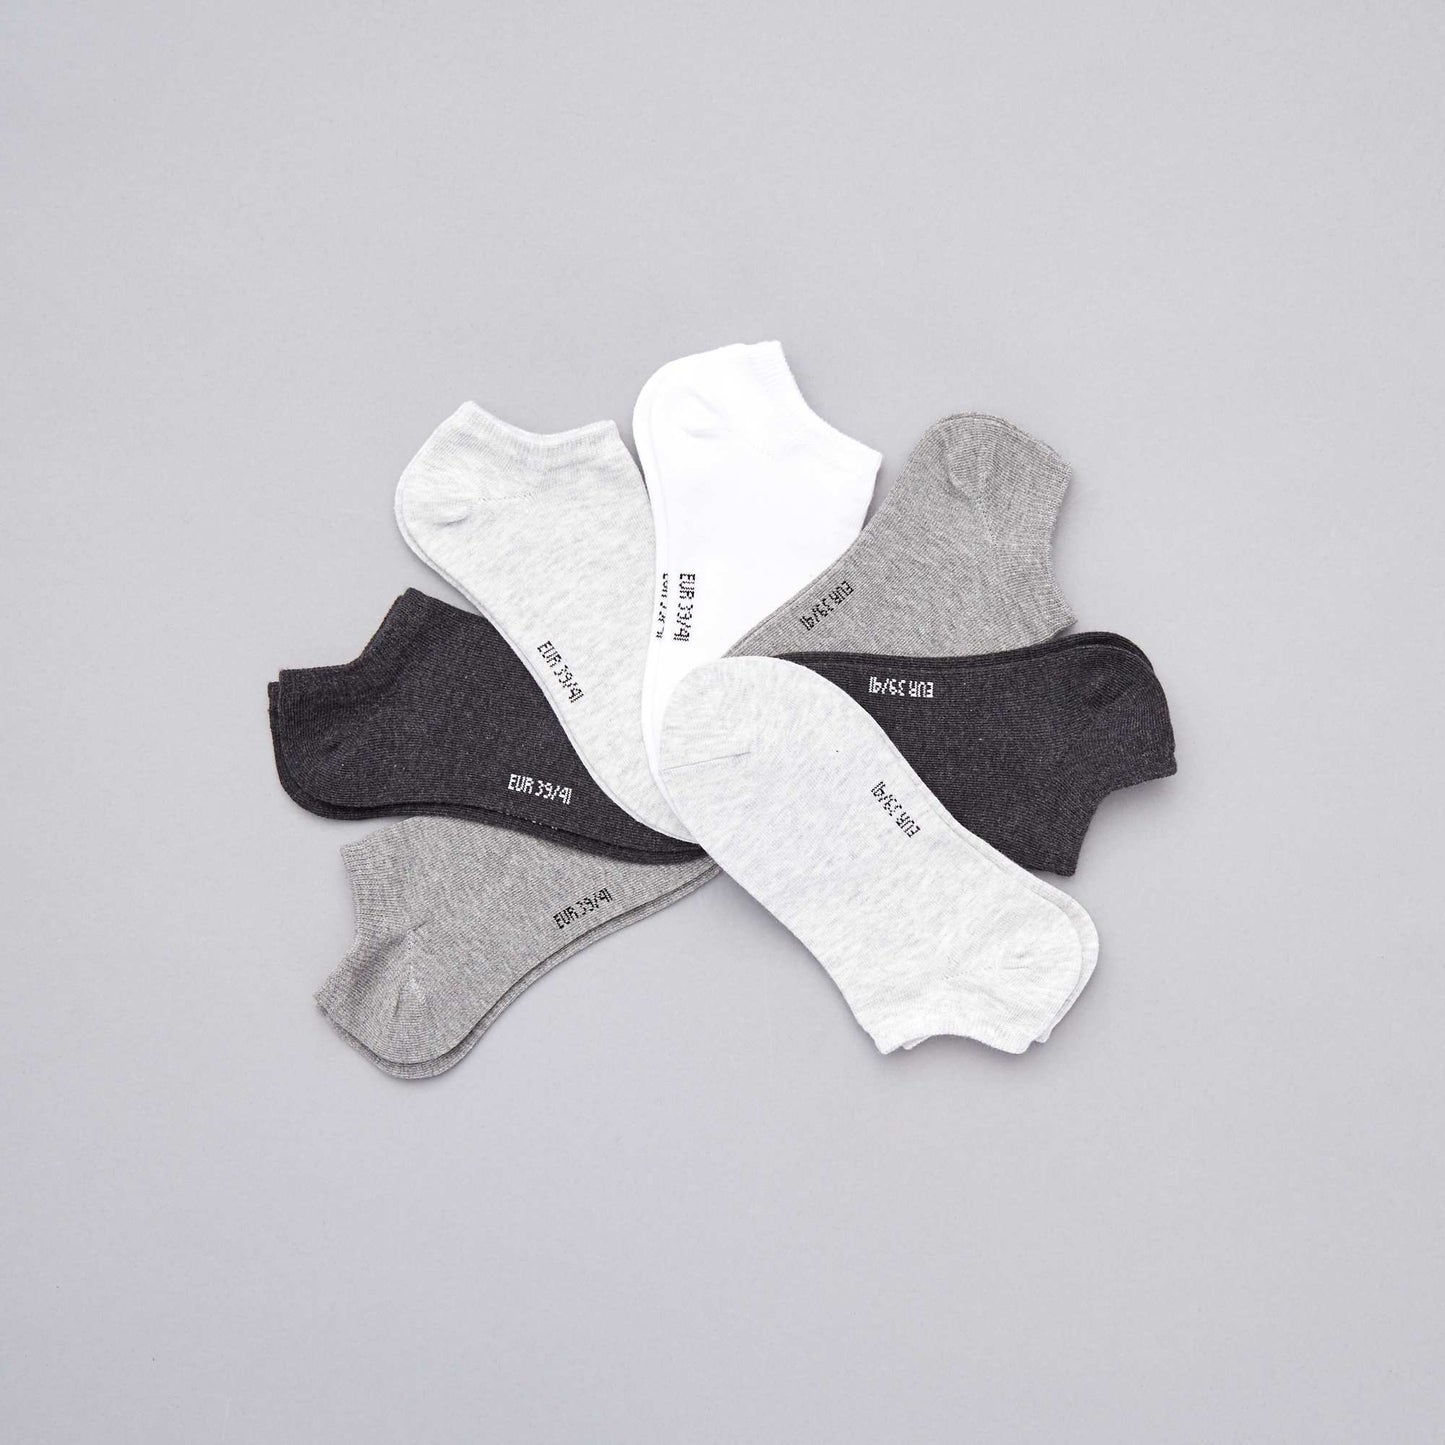 Pack of 7 pairs of trainer socks grey